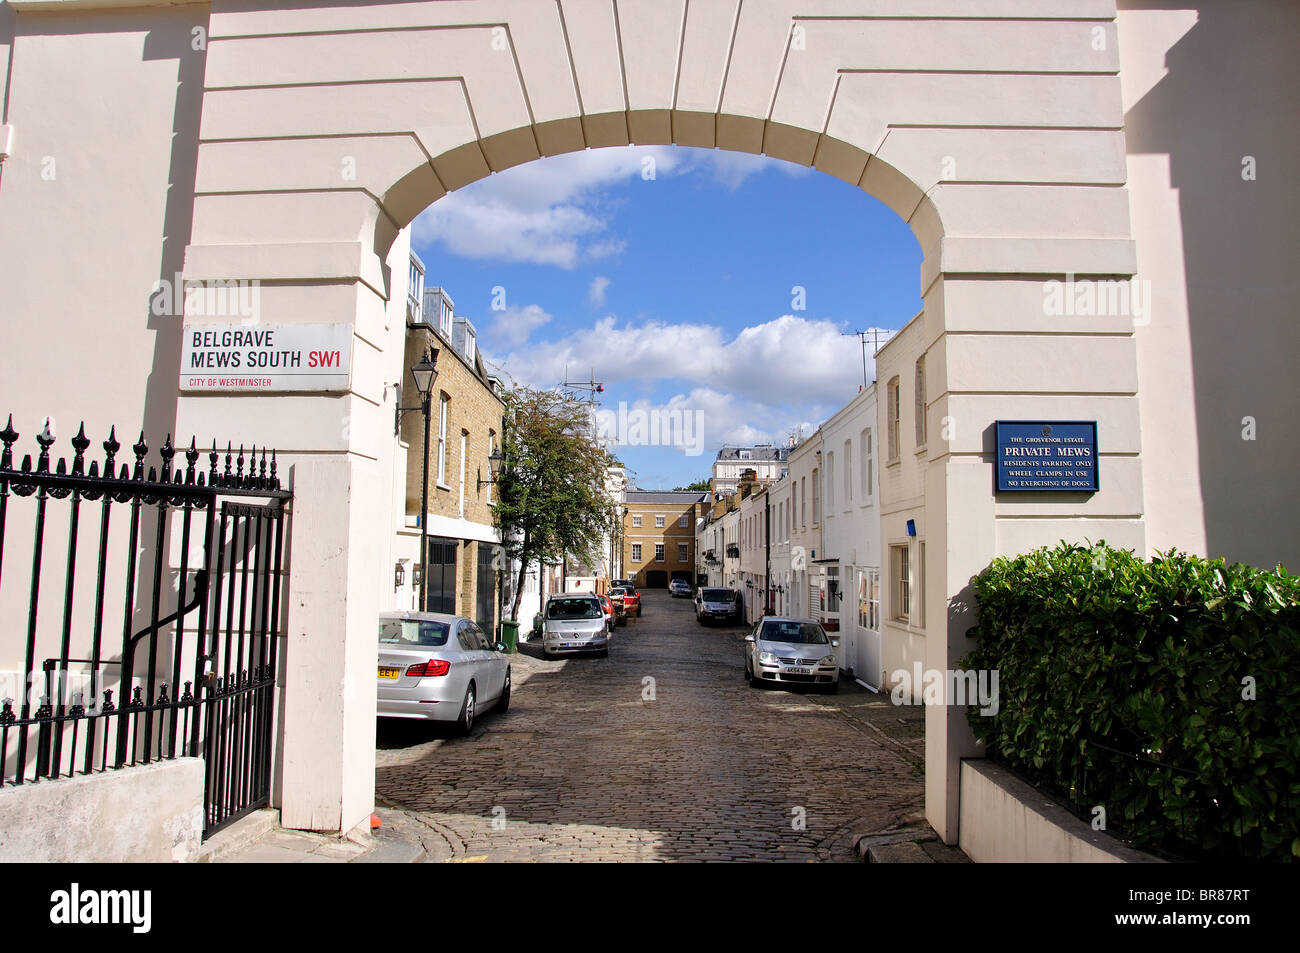 Belgrave Mews South, Belgravia, City of westminster, Greater London, Angleterre, Royaume-Uni Banque D'Images